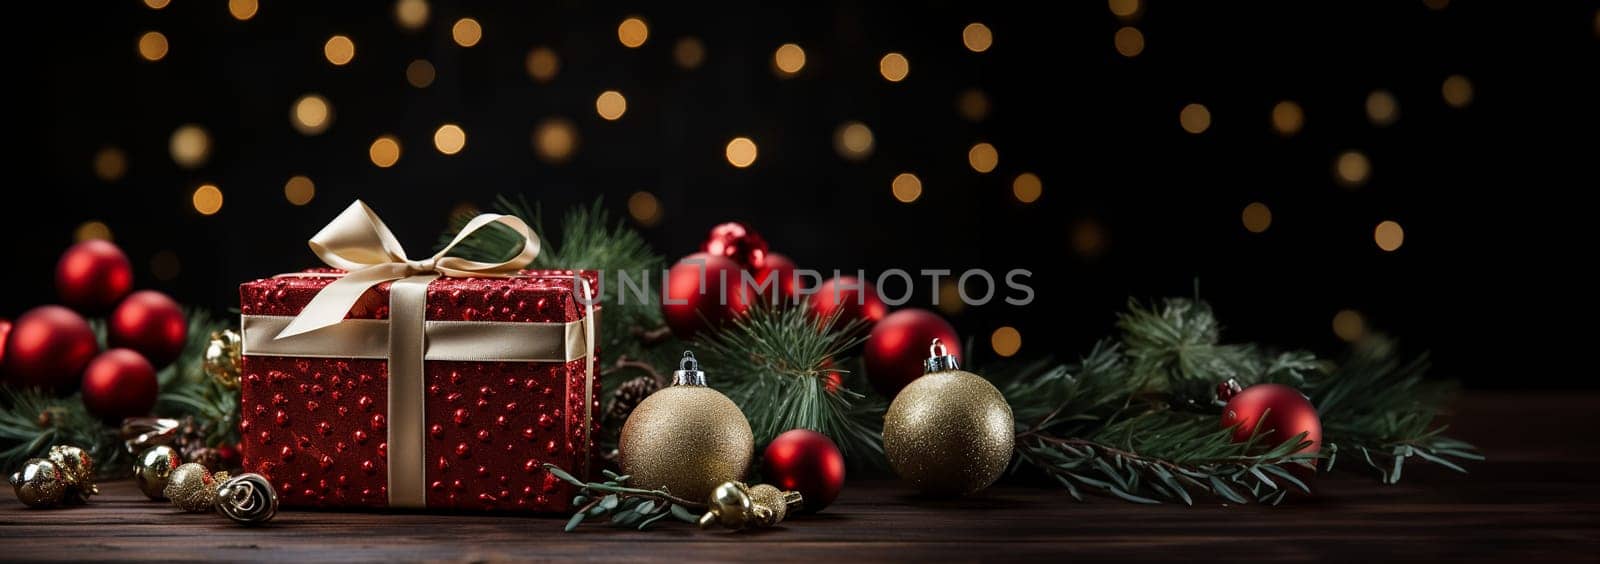 Christmas background theme. Christmas composition. Gifts, fir tree branches, red decorations on dark background. Christmas, winter, new year concept. Flat lay, top view, copy space. Merry Christmas Holiday space for text